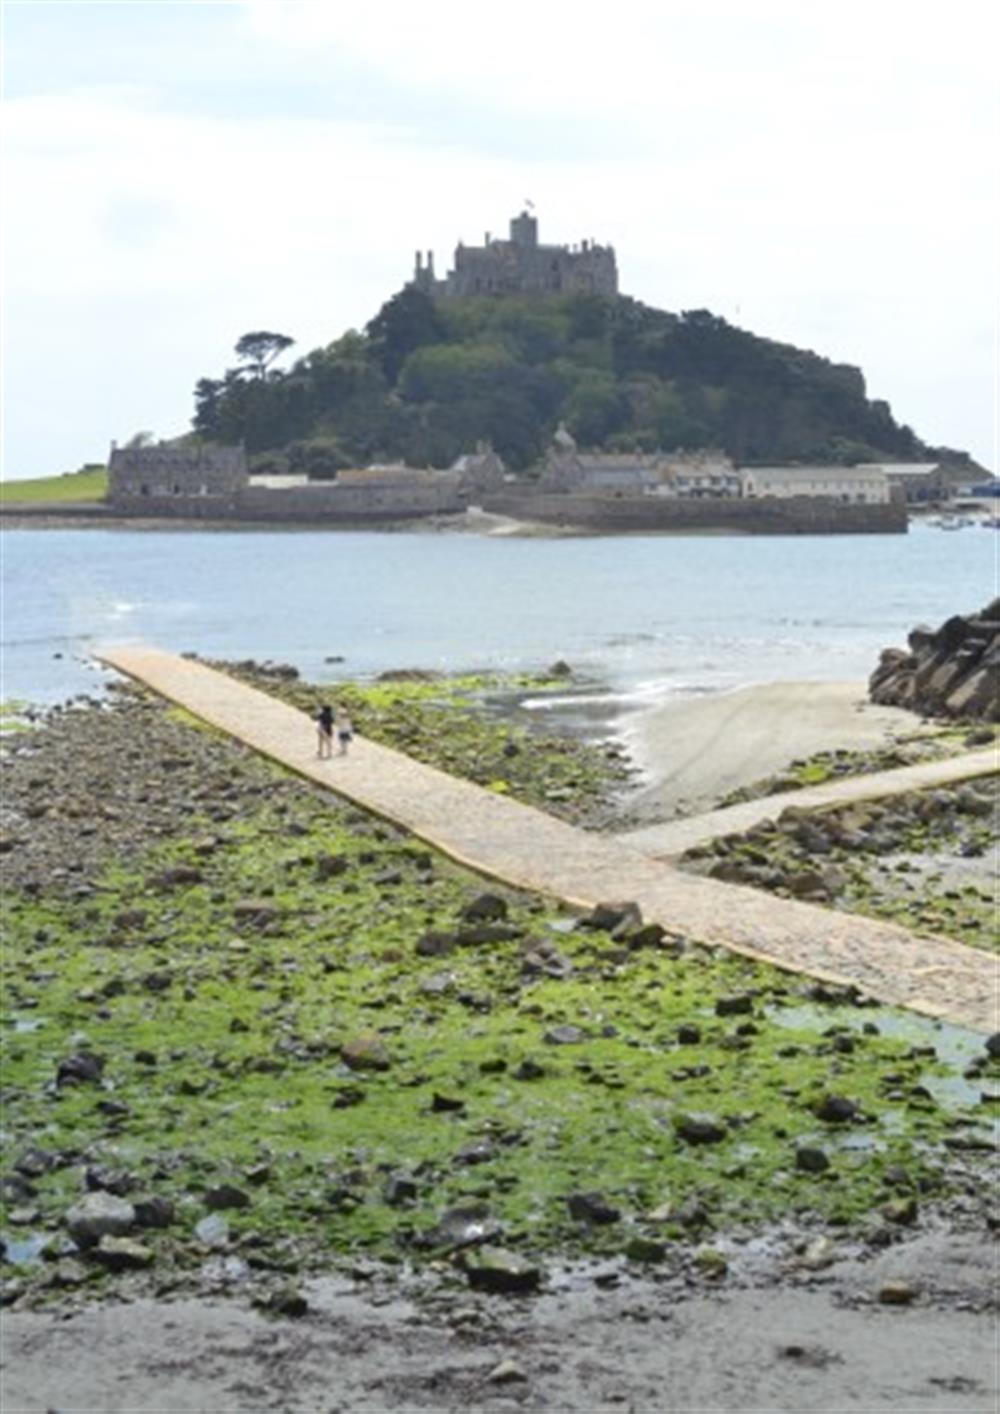 St Michael's Mount is 45 minutes away - cross the causeway by foot (if the tide is out!) or catch the water-taxi across to the island.